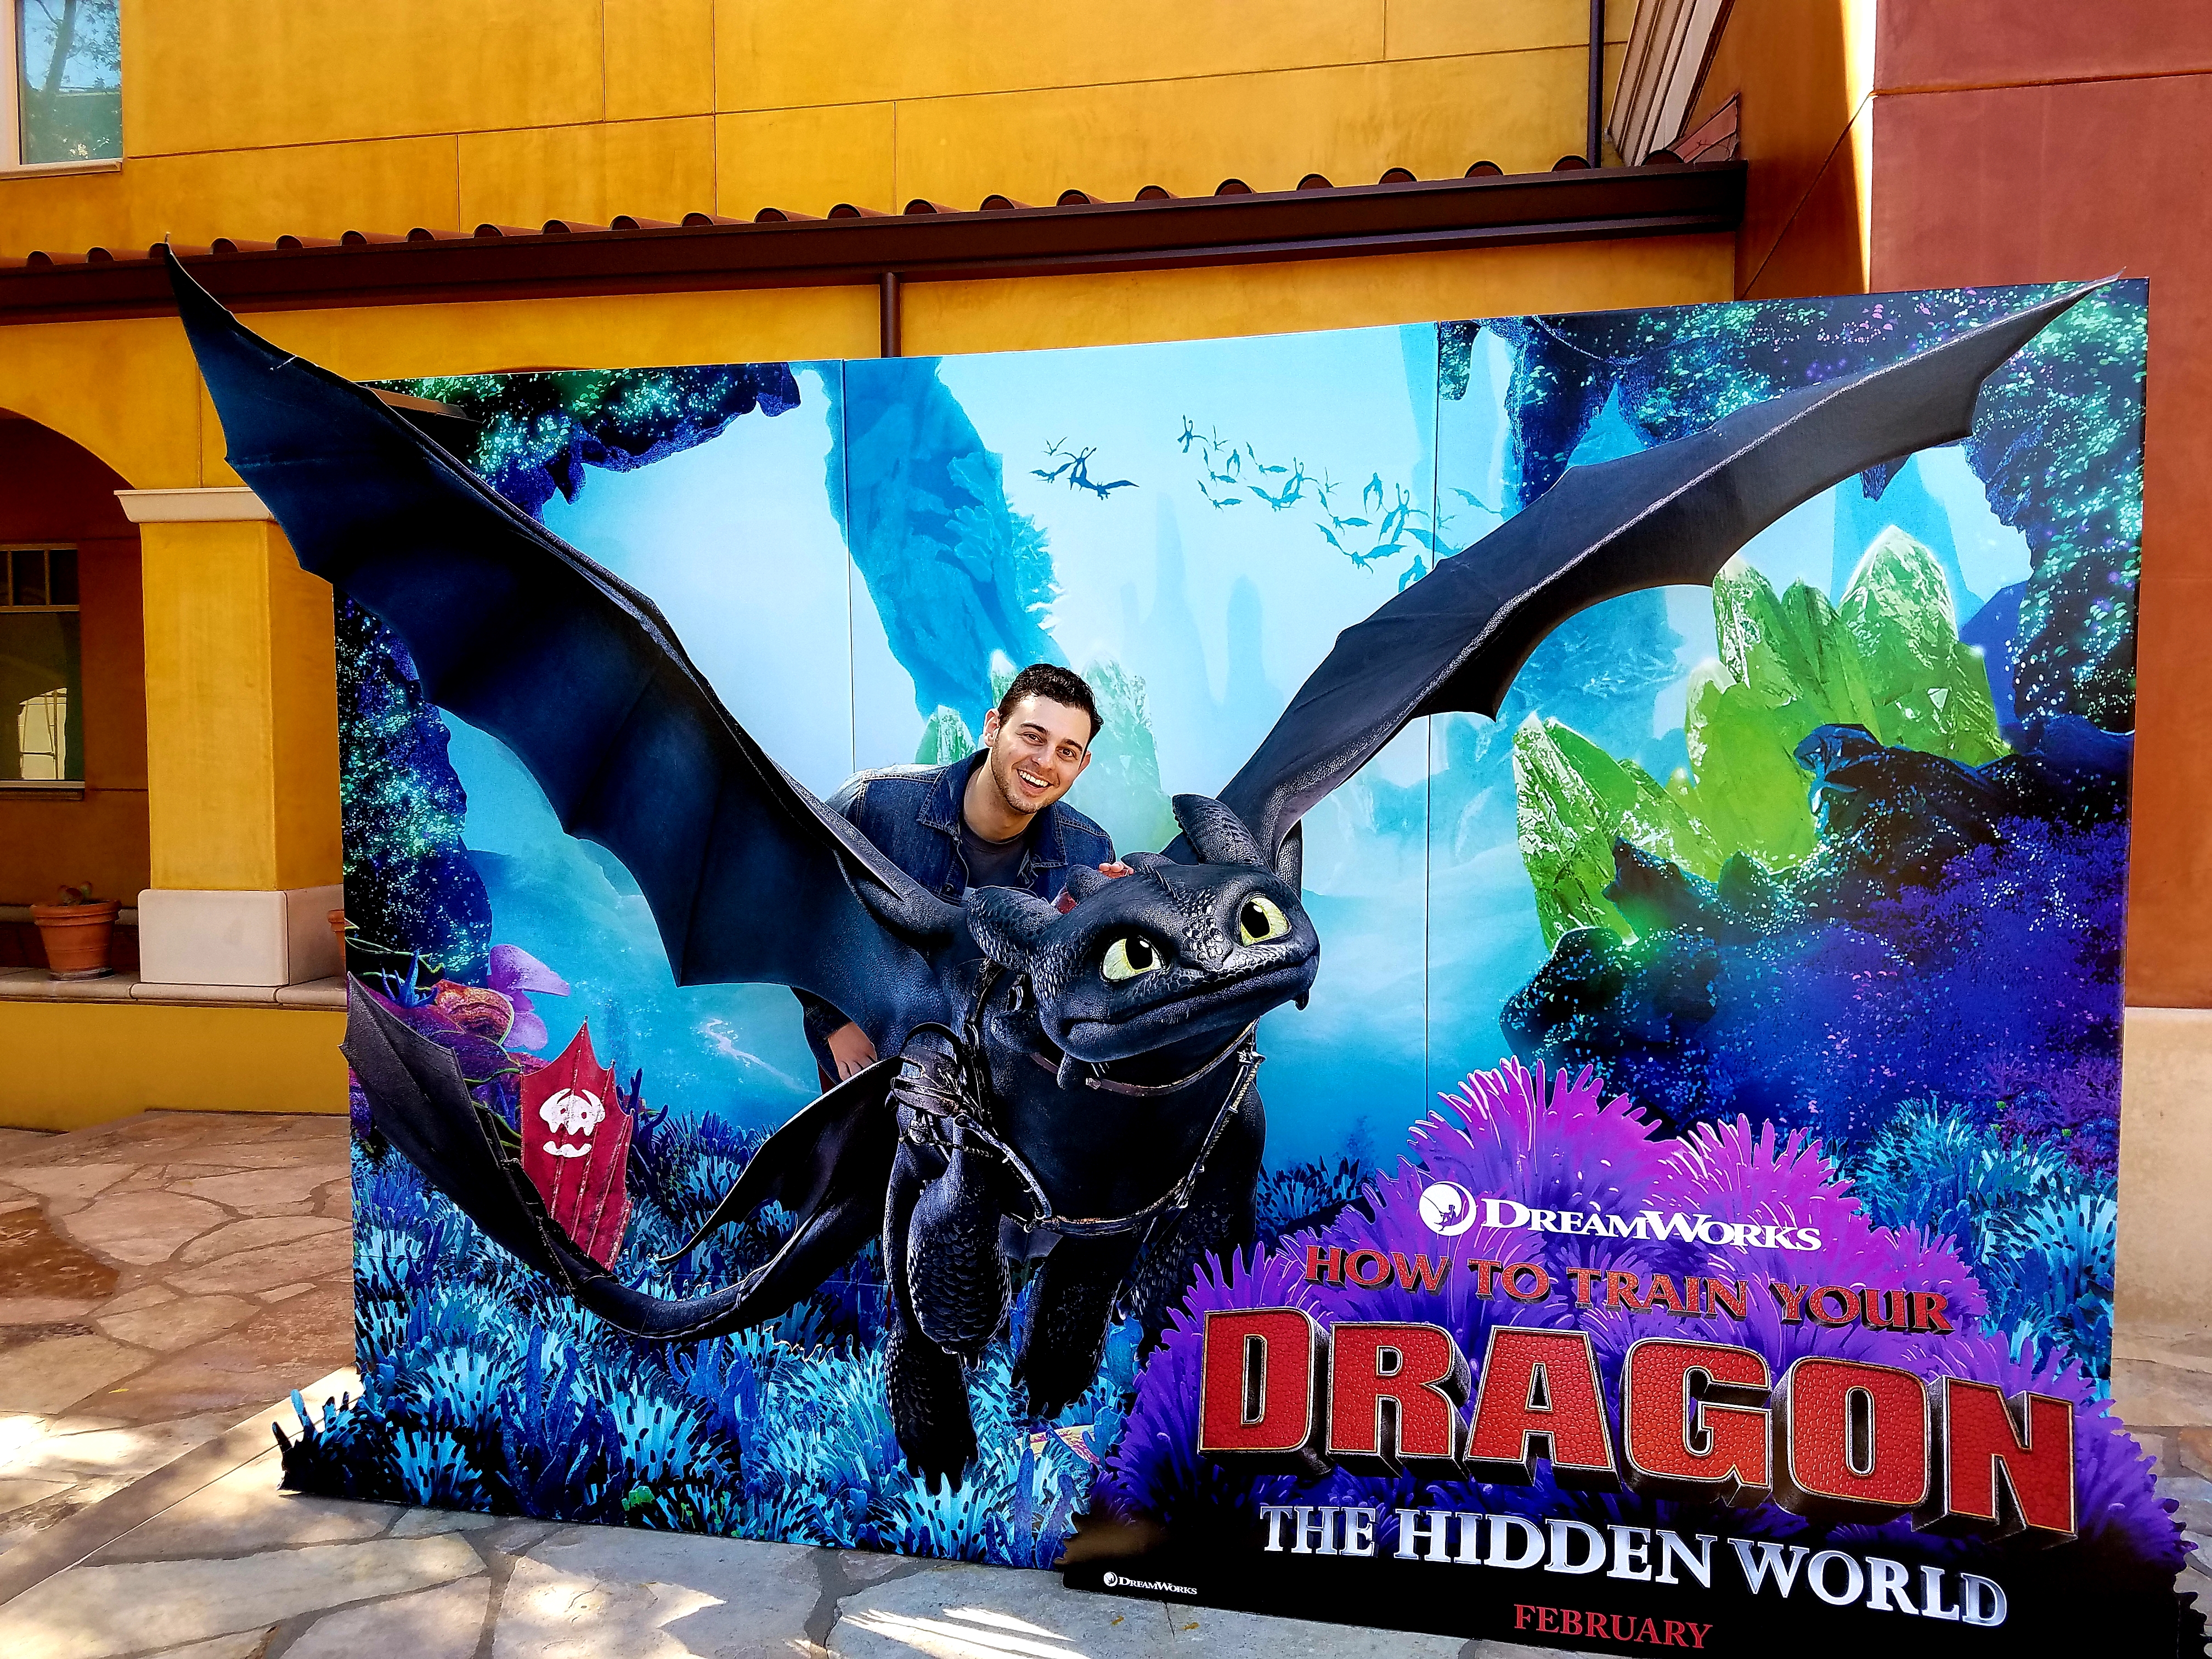 LIVING THE DREAM CAN WORK—The brand strategy at Woodbury University led to a story about 2016 graduate Zare Oganesyan (pictured), who became a production supervisor for the DreamWorks Animation TV series Spirit: Riding Free, streaming on Netflix. UBmag.me/dreamworks